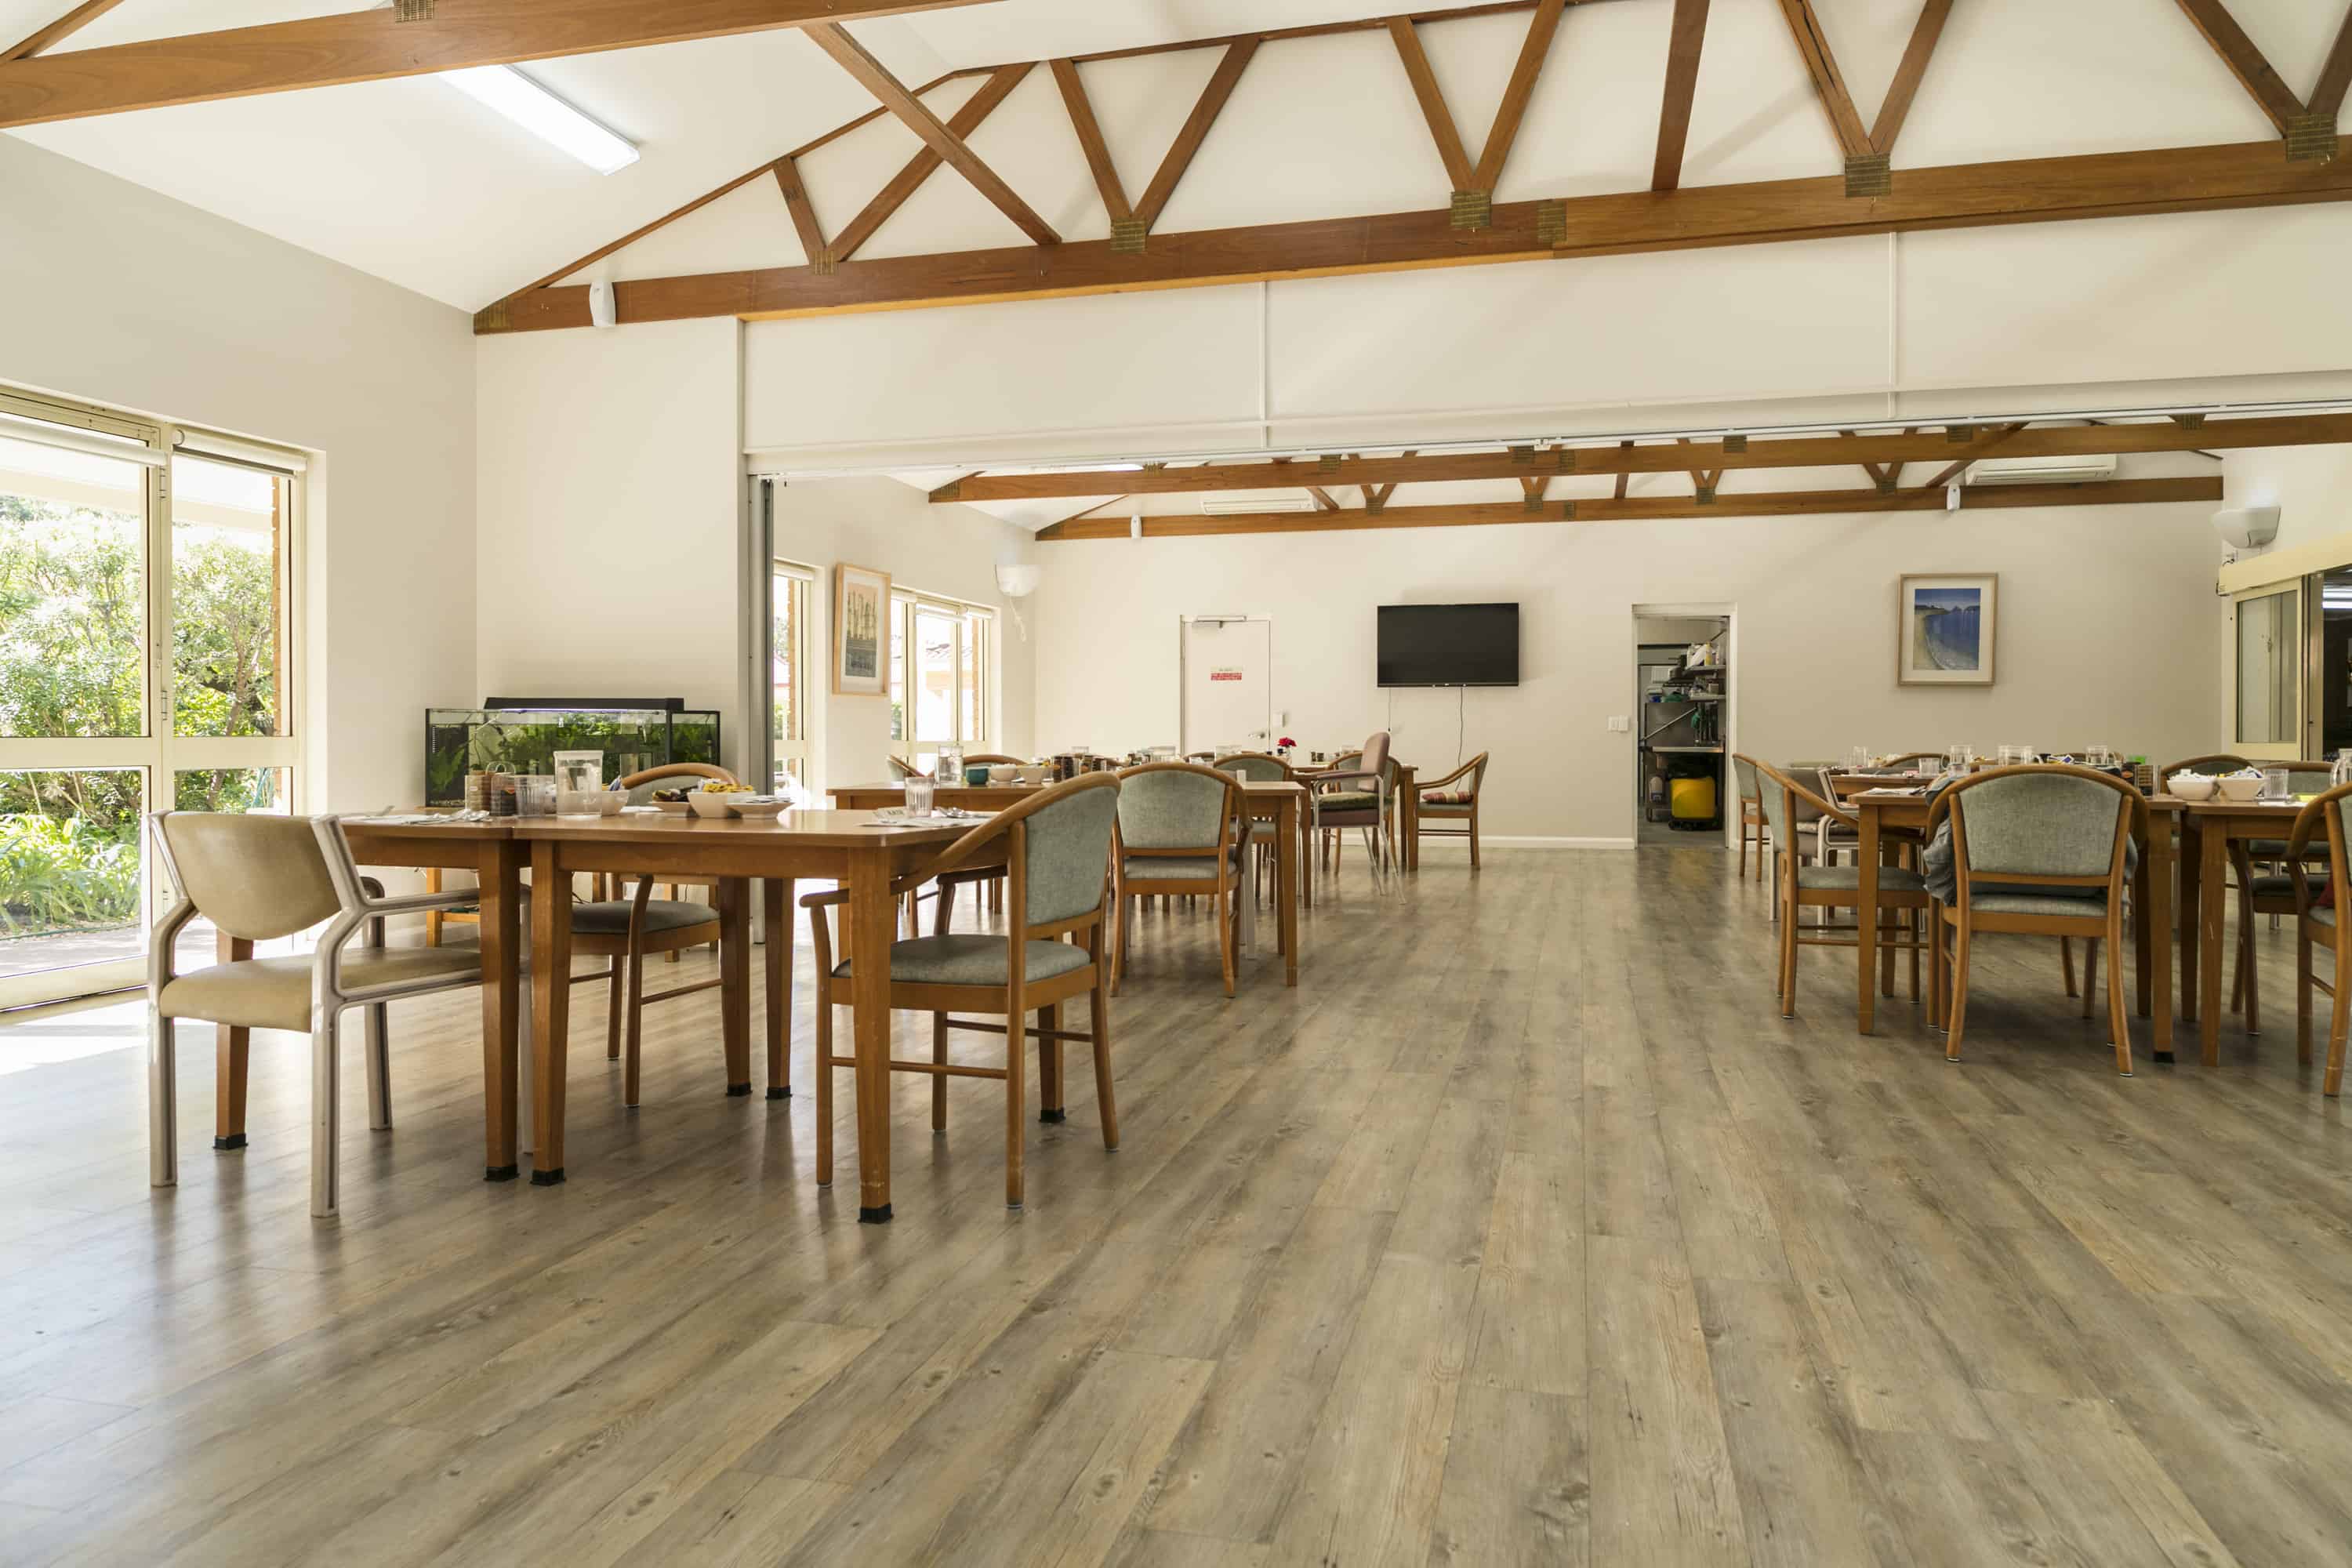 The spacious, light-filled dining area of Whiddon's nursing home in Port Macquarie,